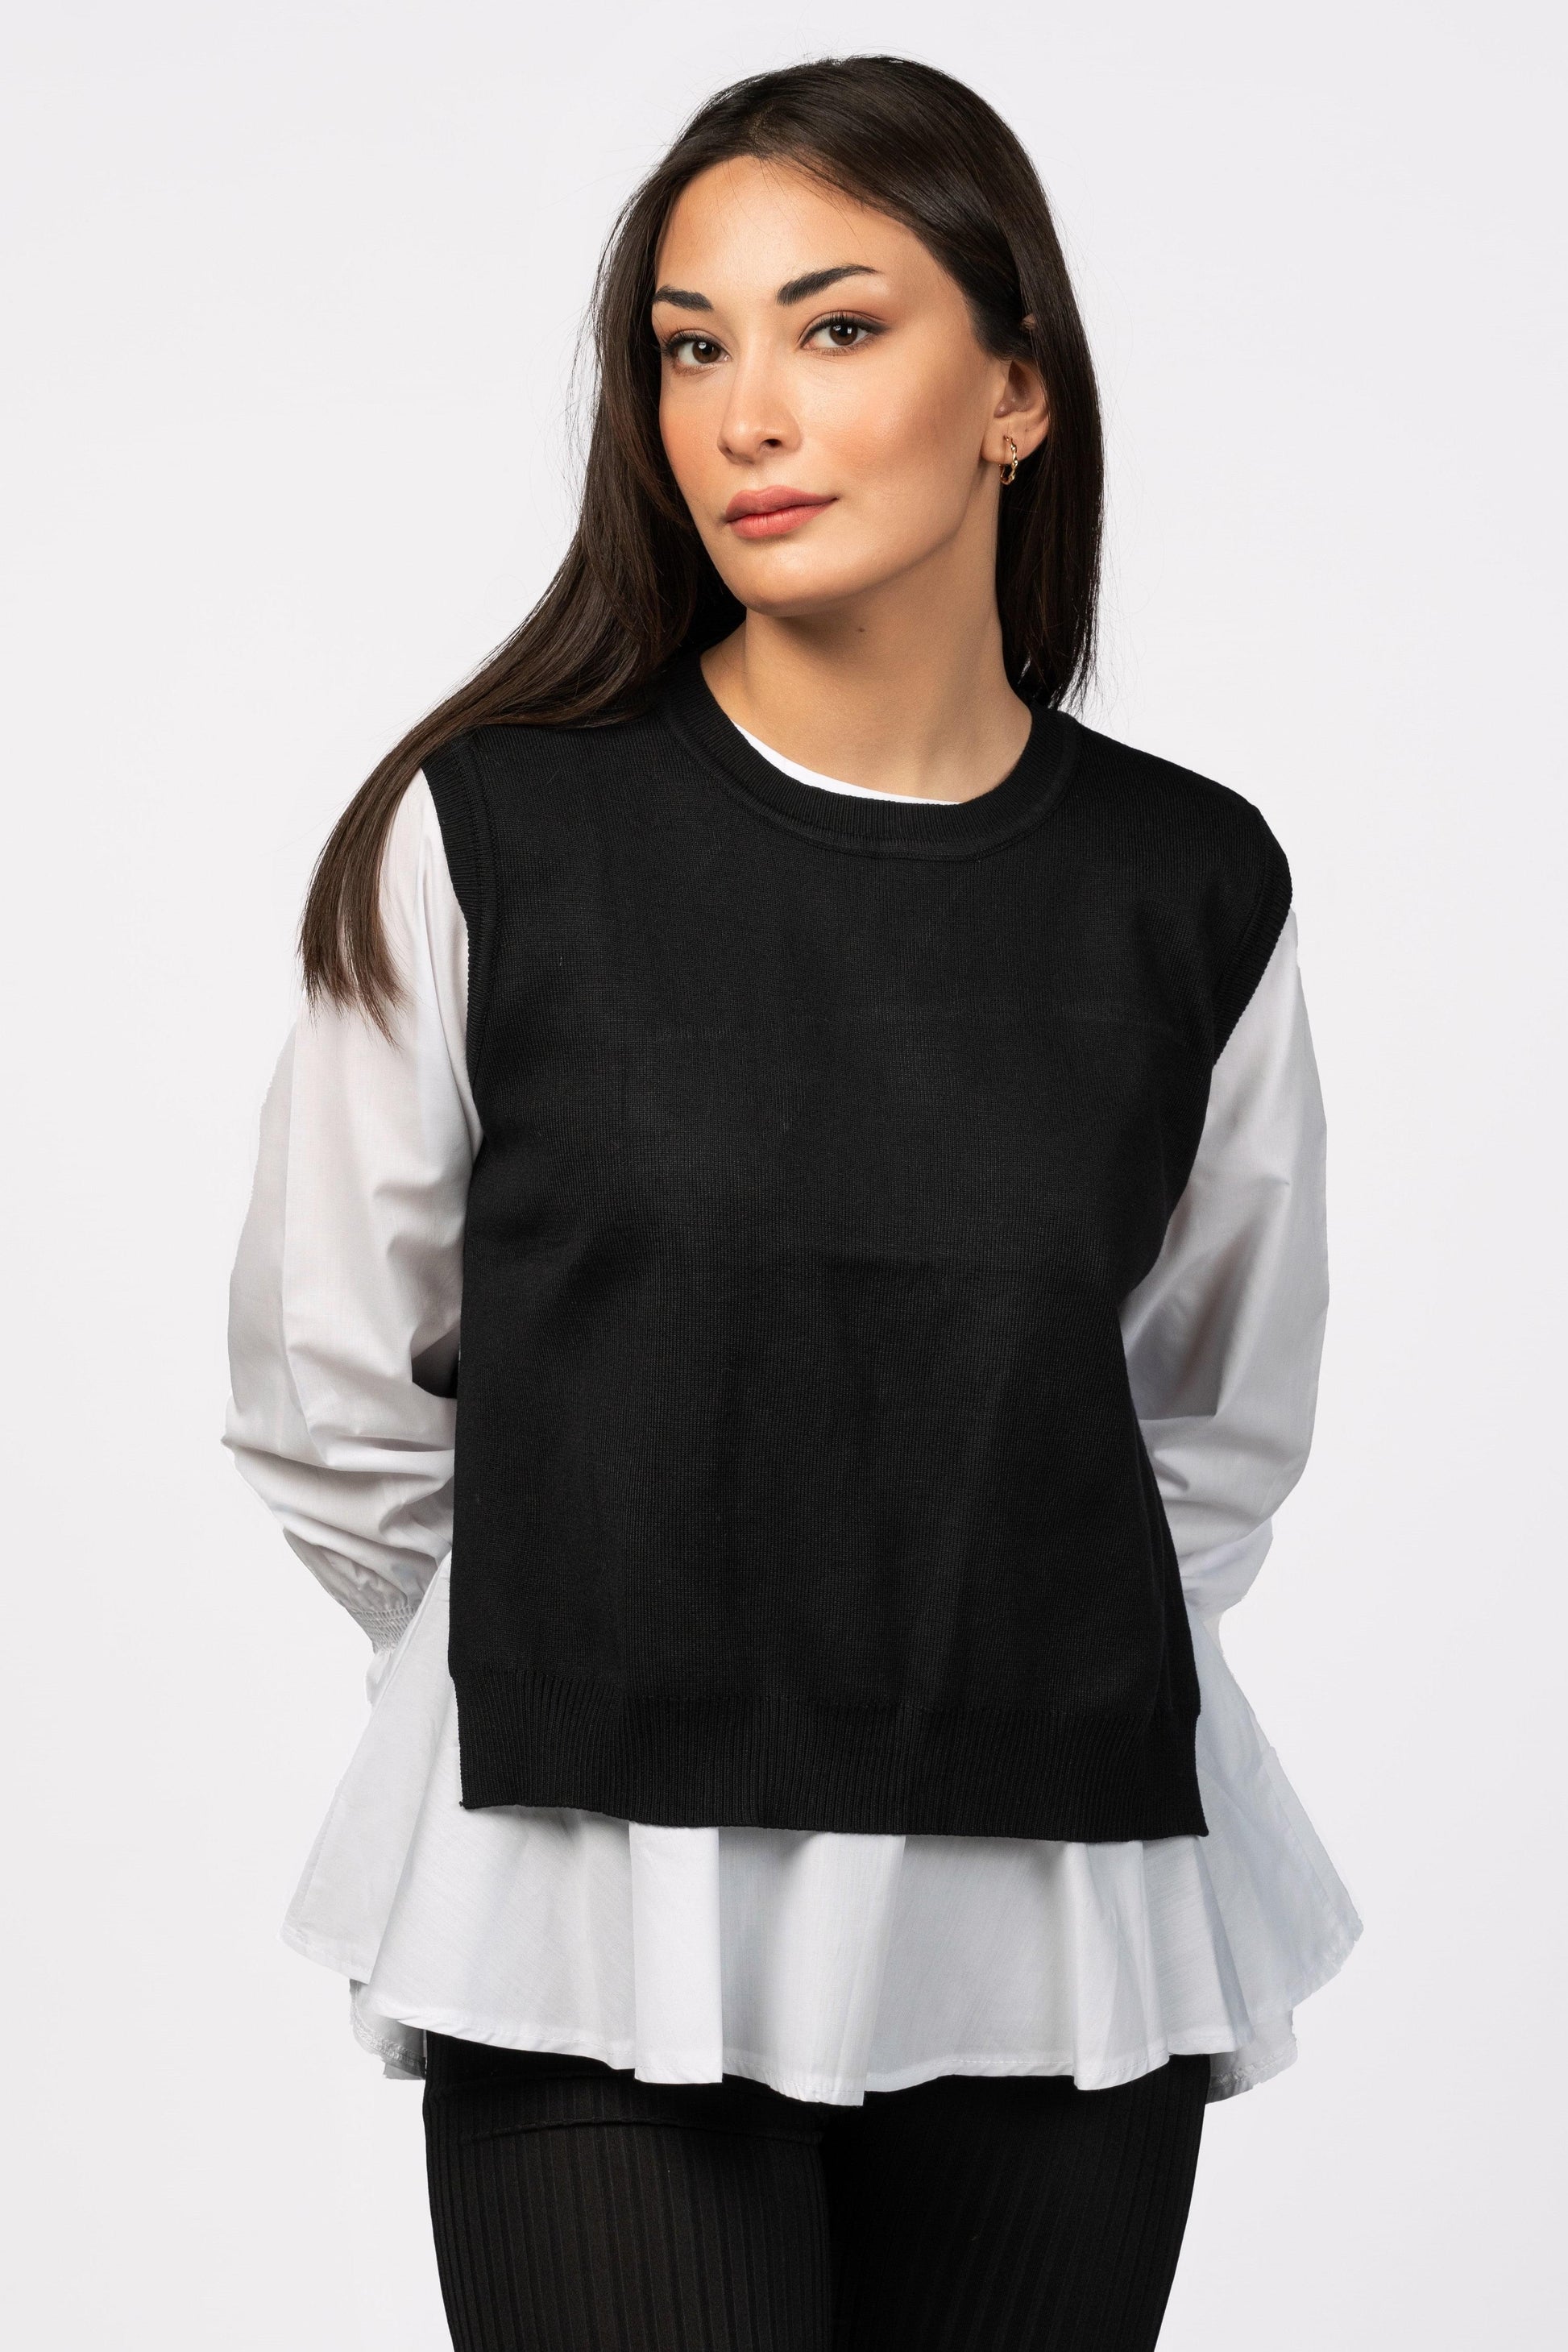 Shirt with ruffled cuffs along with sweater Ramay